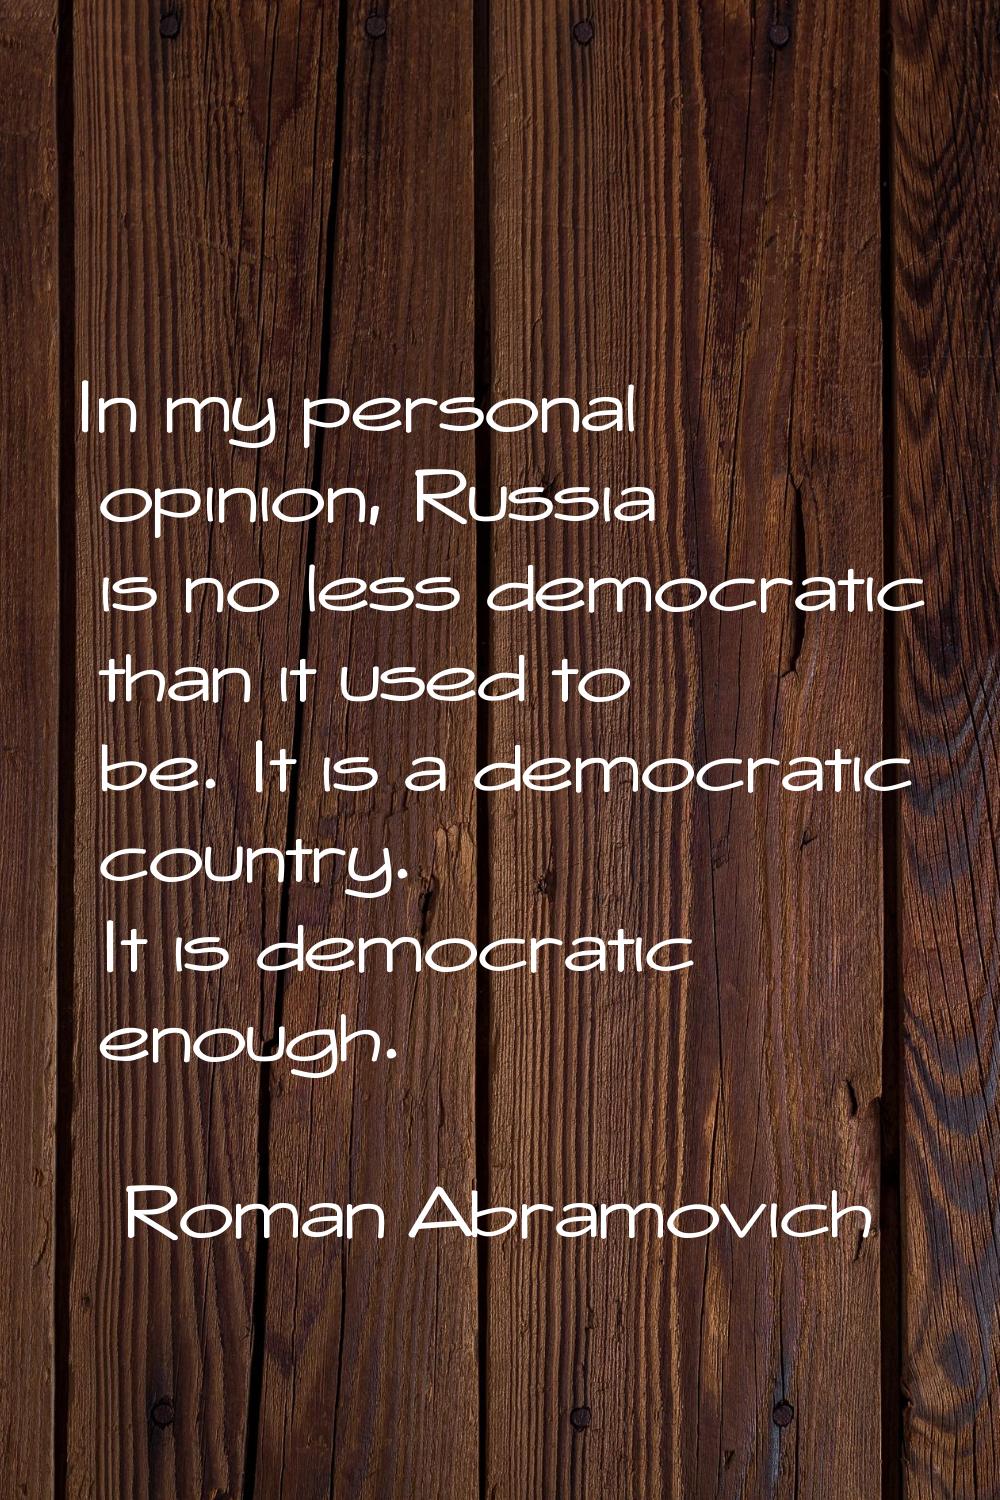 In my personal opinion, Russia is no less democratic than it used to be. It is a democratic country